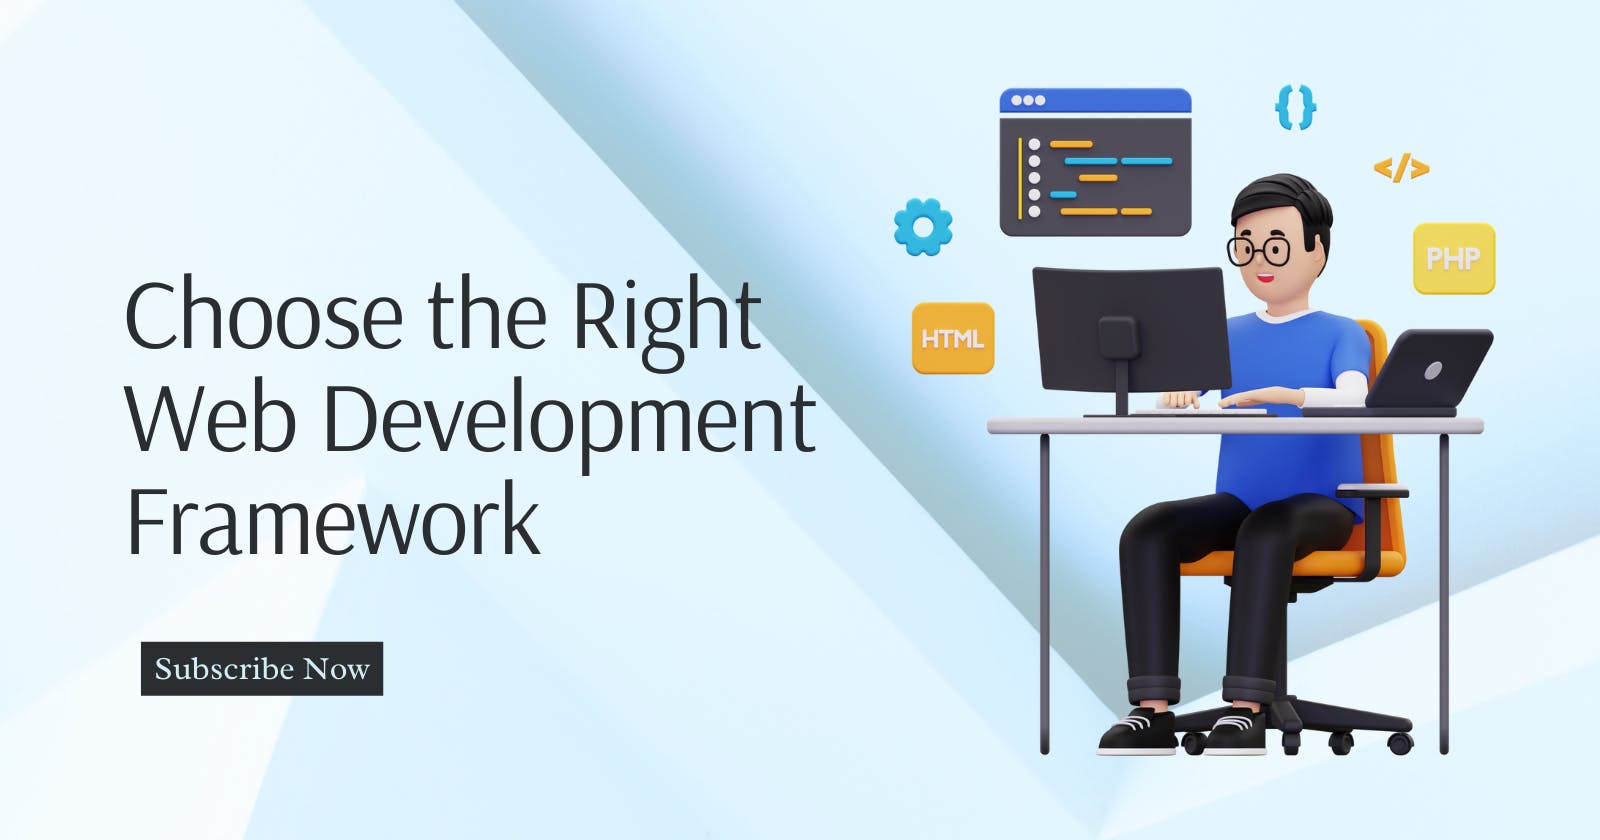 How to Choose the Right Web Development Framework for Projects as a Beginner